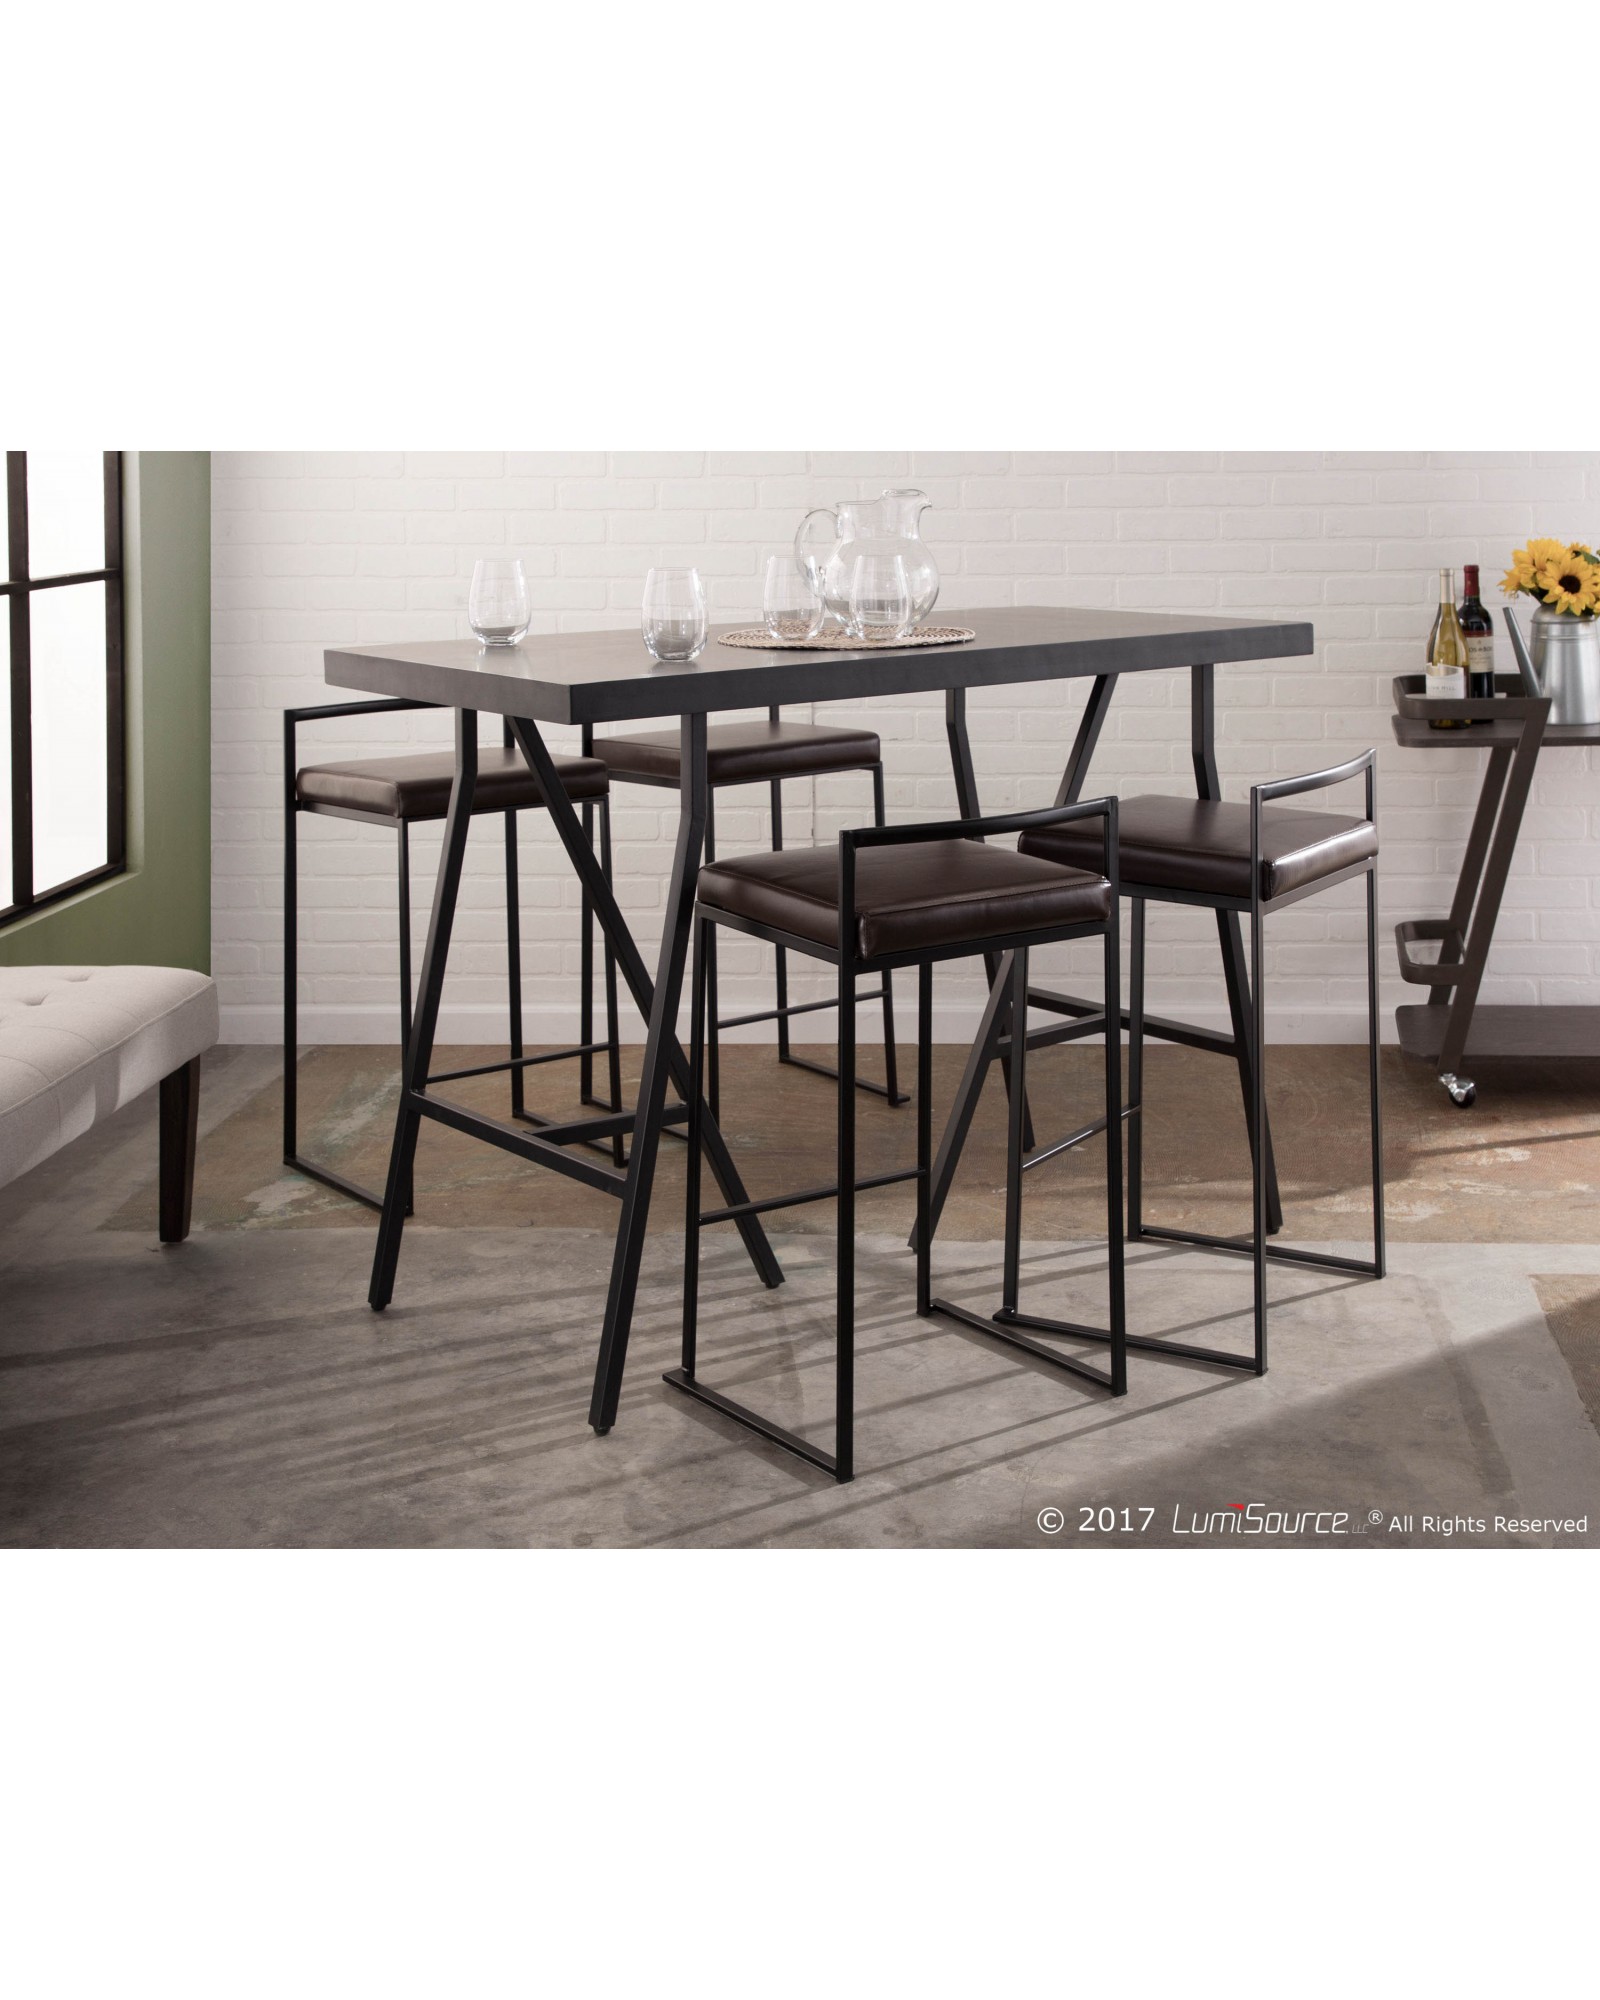 Fuji Contemporary Stackable Counter Stool in Black with Brown Faux Leather Cushion - Set of 2